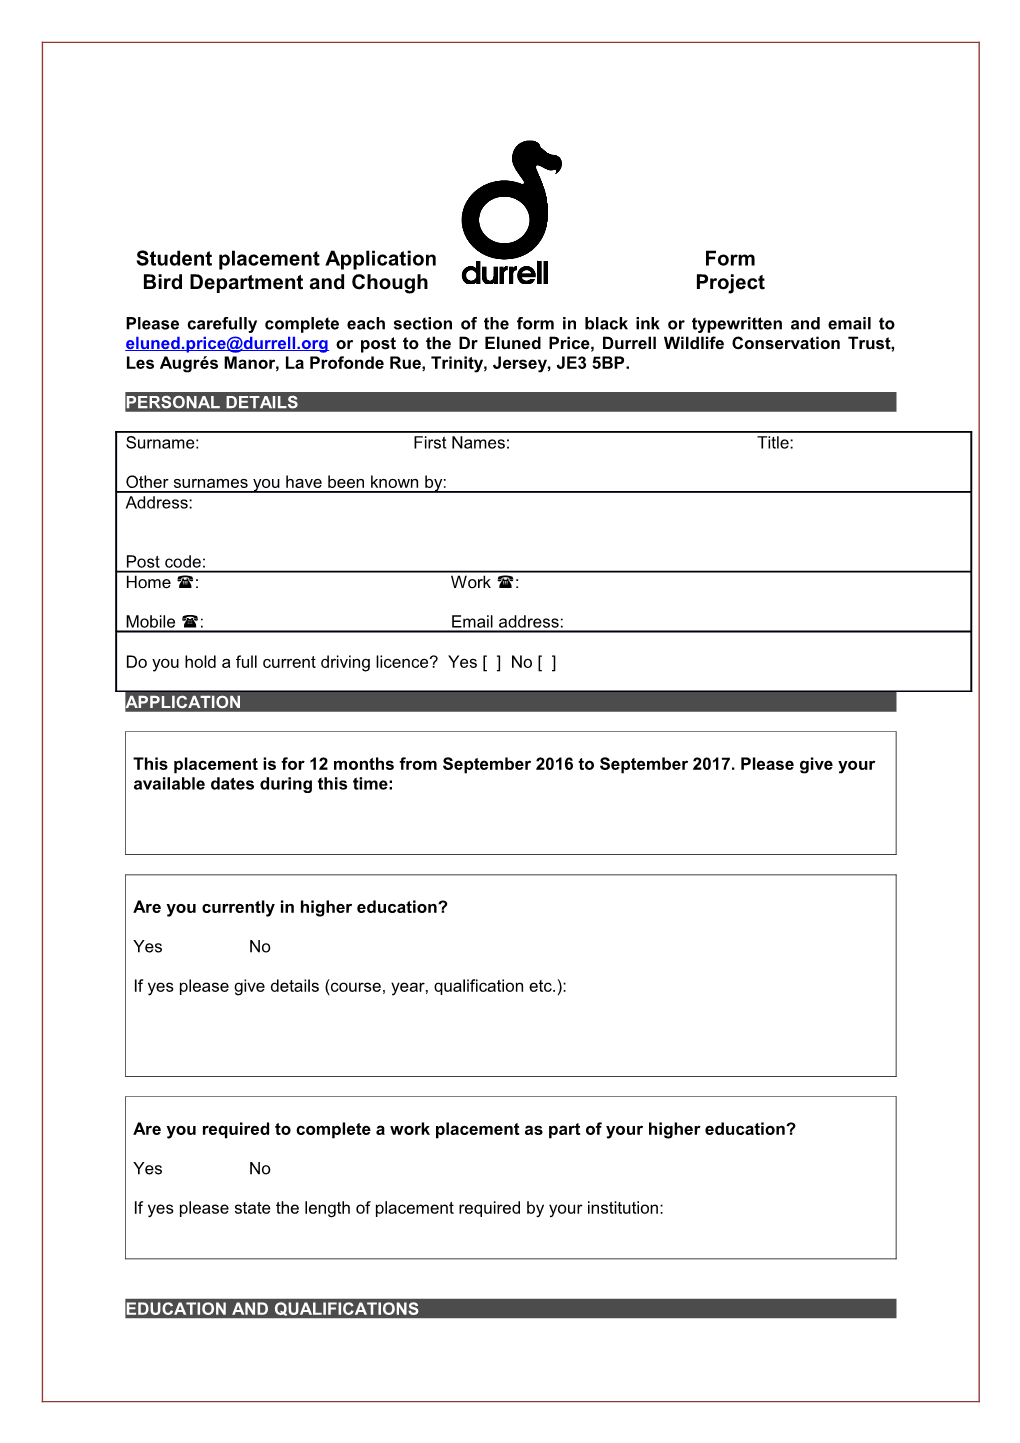 Student Placement Application Form